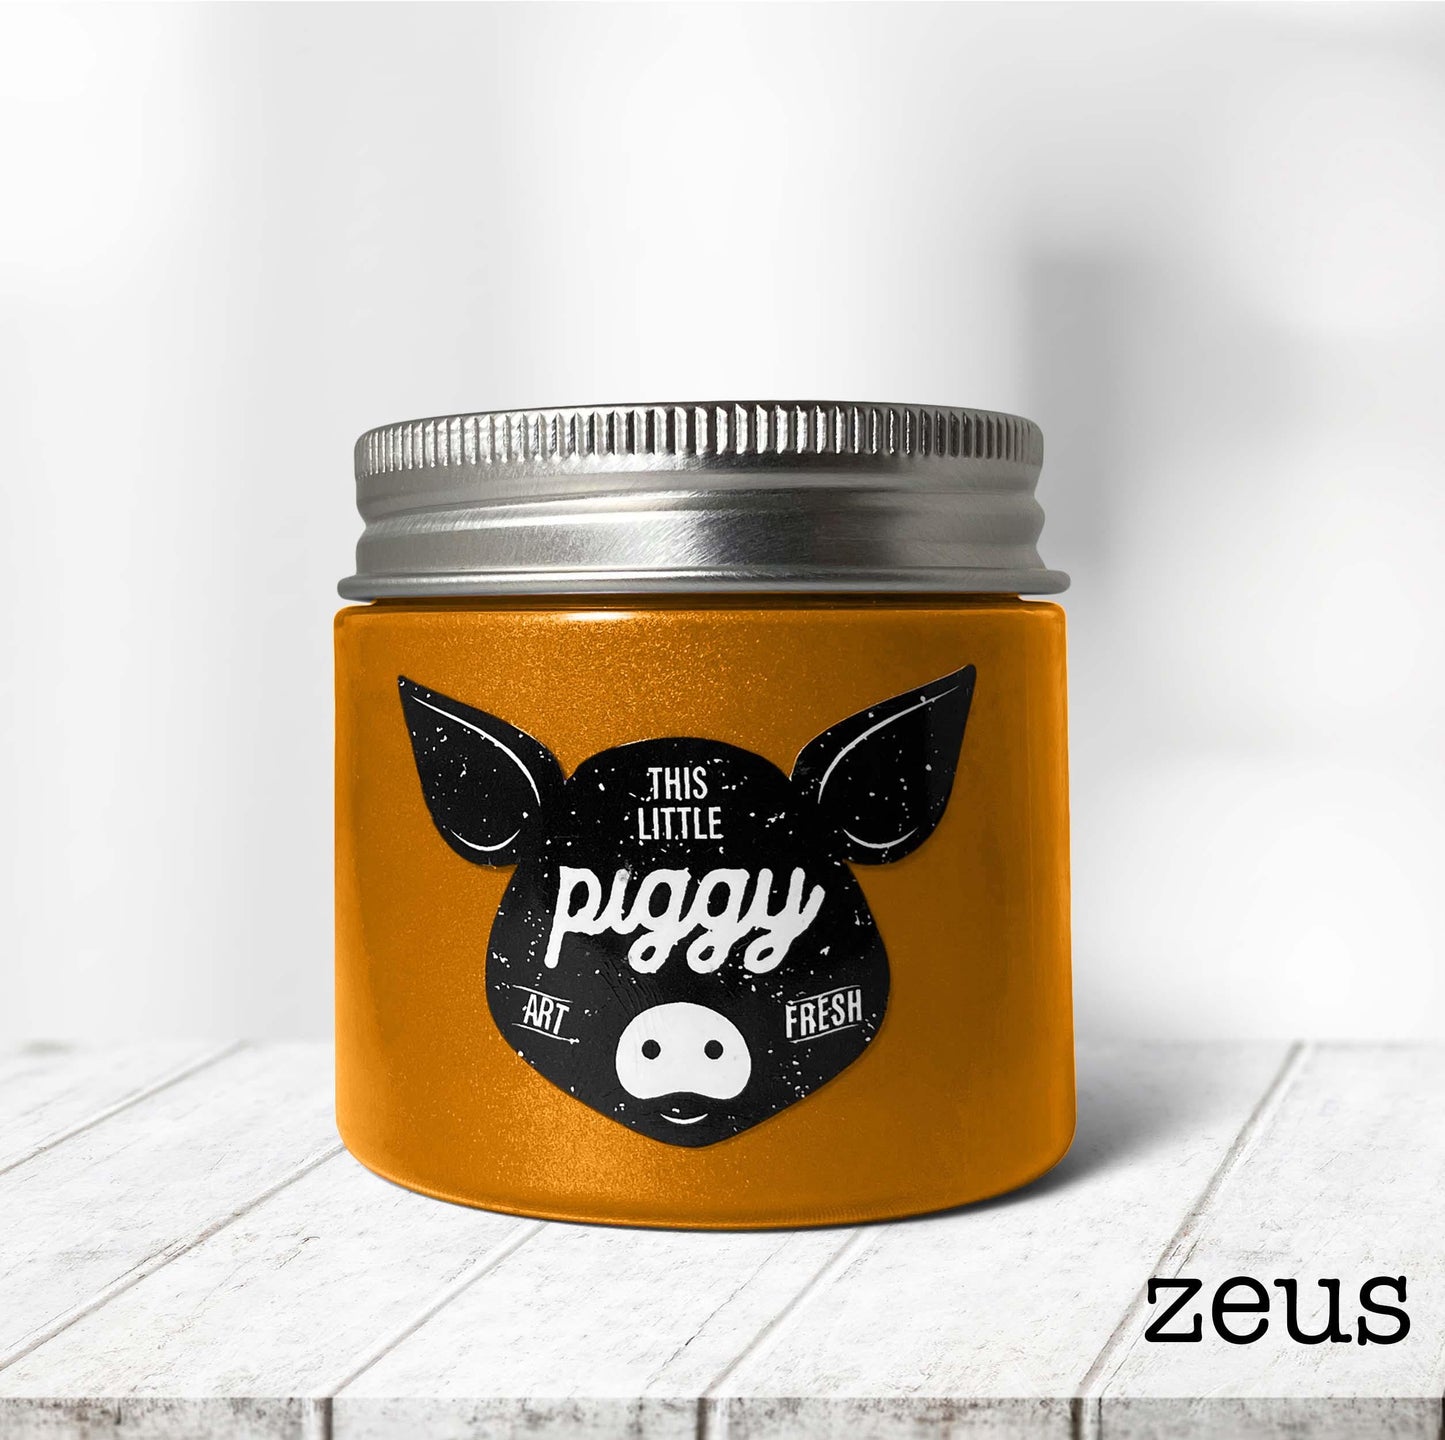 Load image into Gallery viewer, This Little Piggy : Zeus
